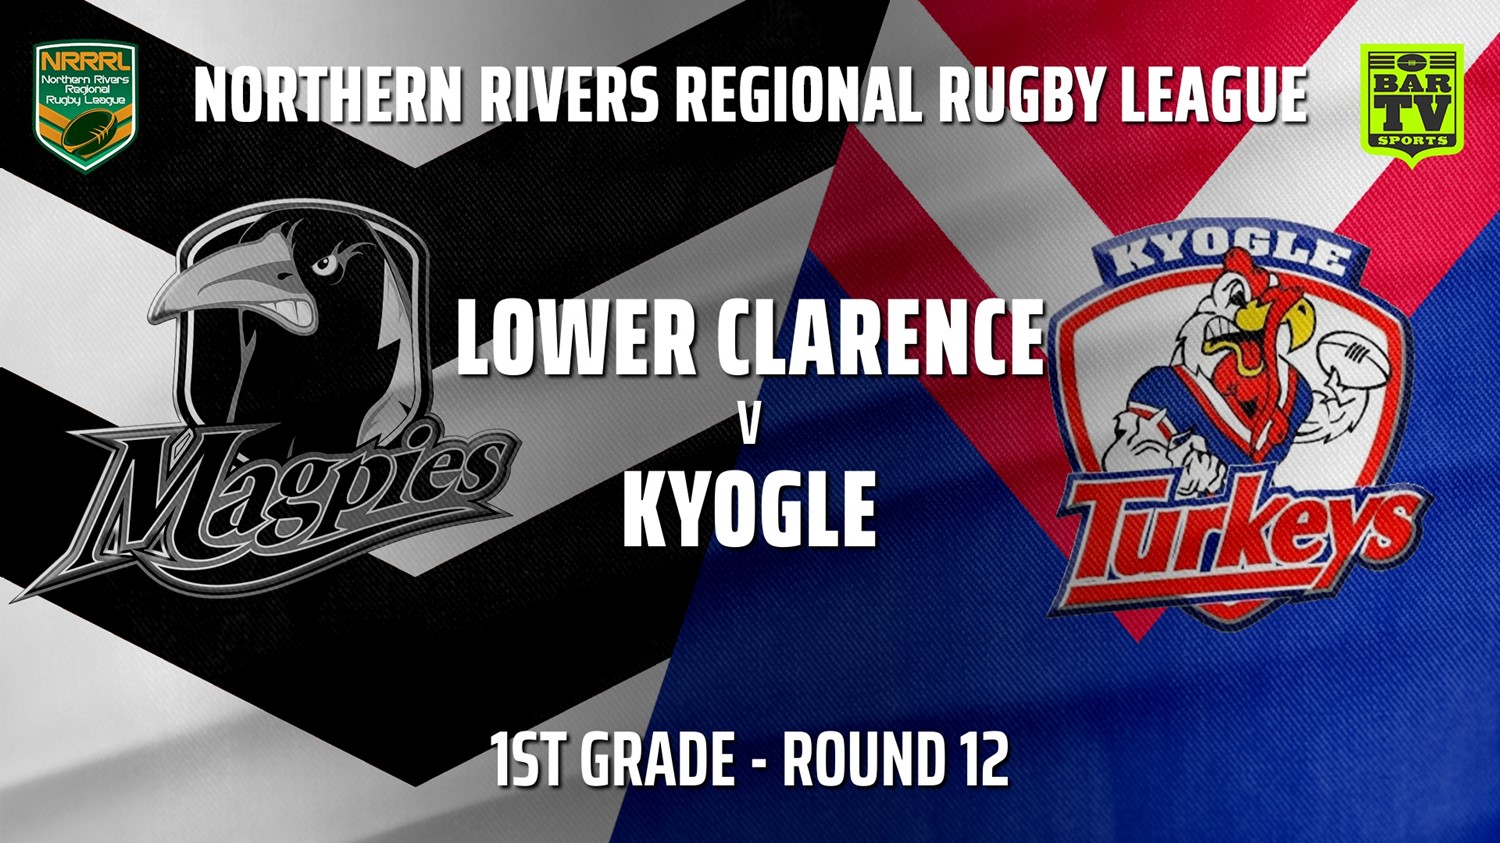 210725-Northern Rivers Round 12 - 1st Grade - Lower Clarence Magpies v Kyogle Turkeys Slate Image